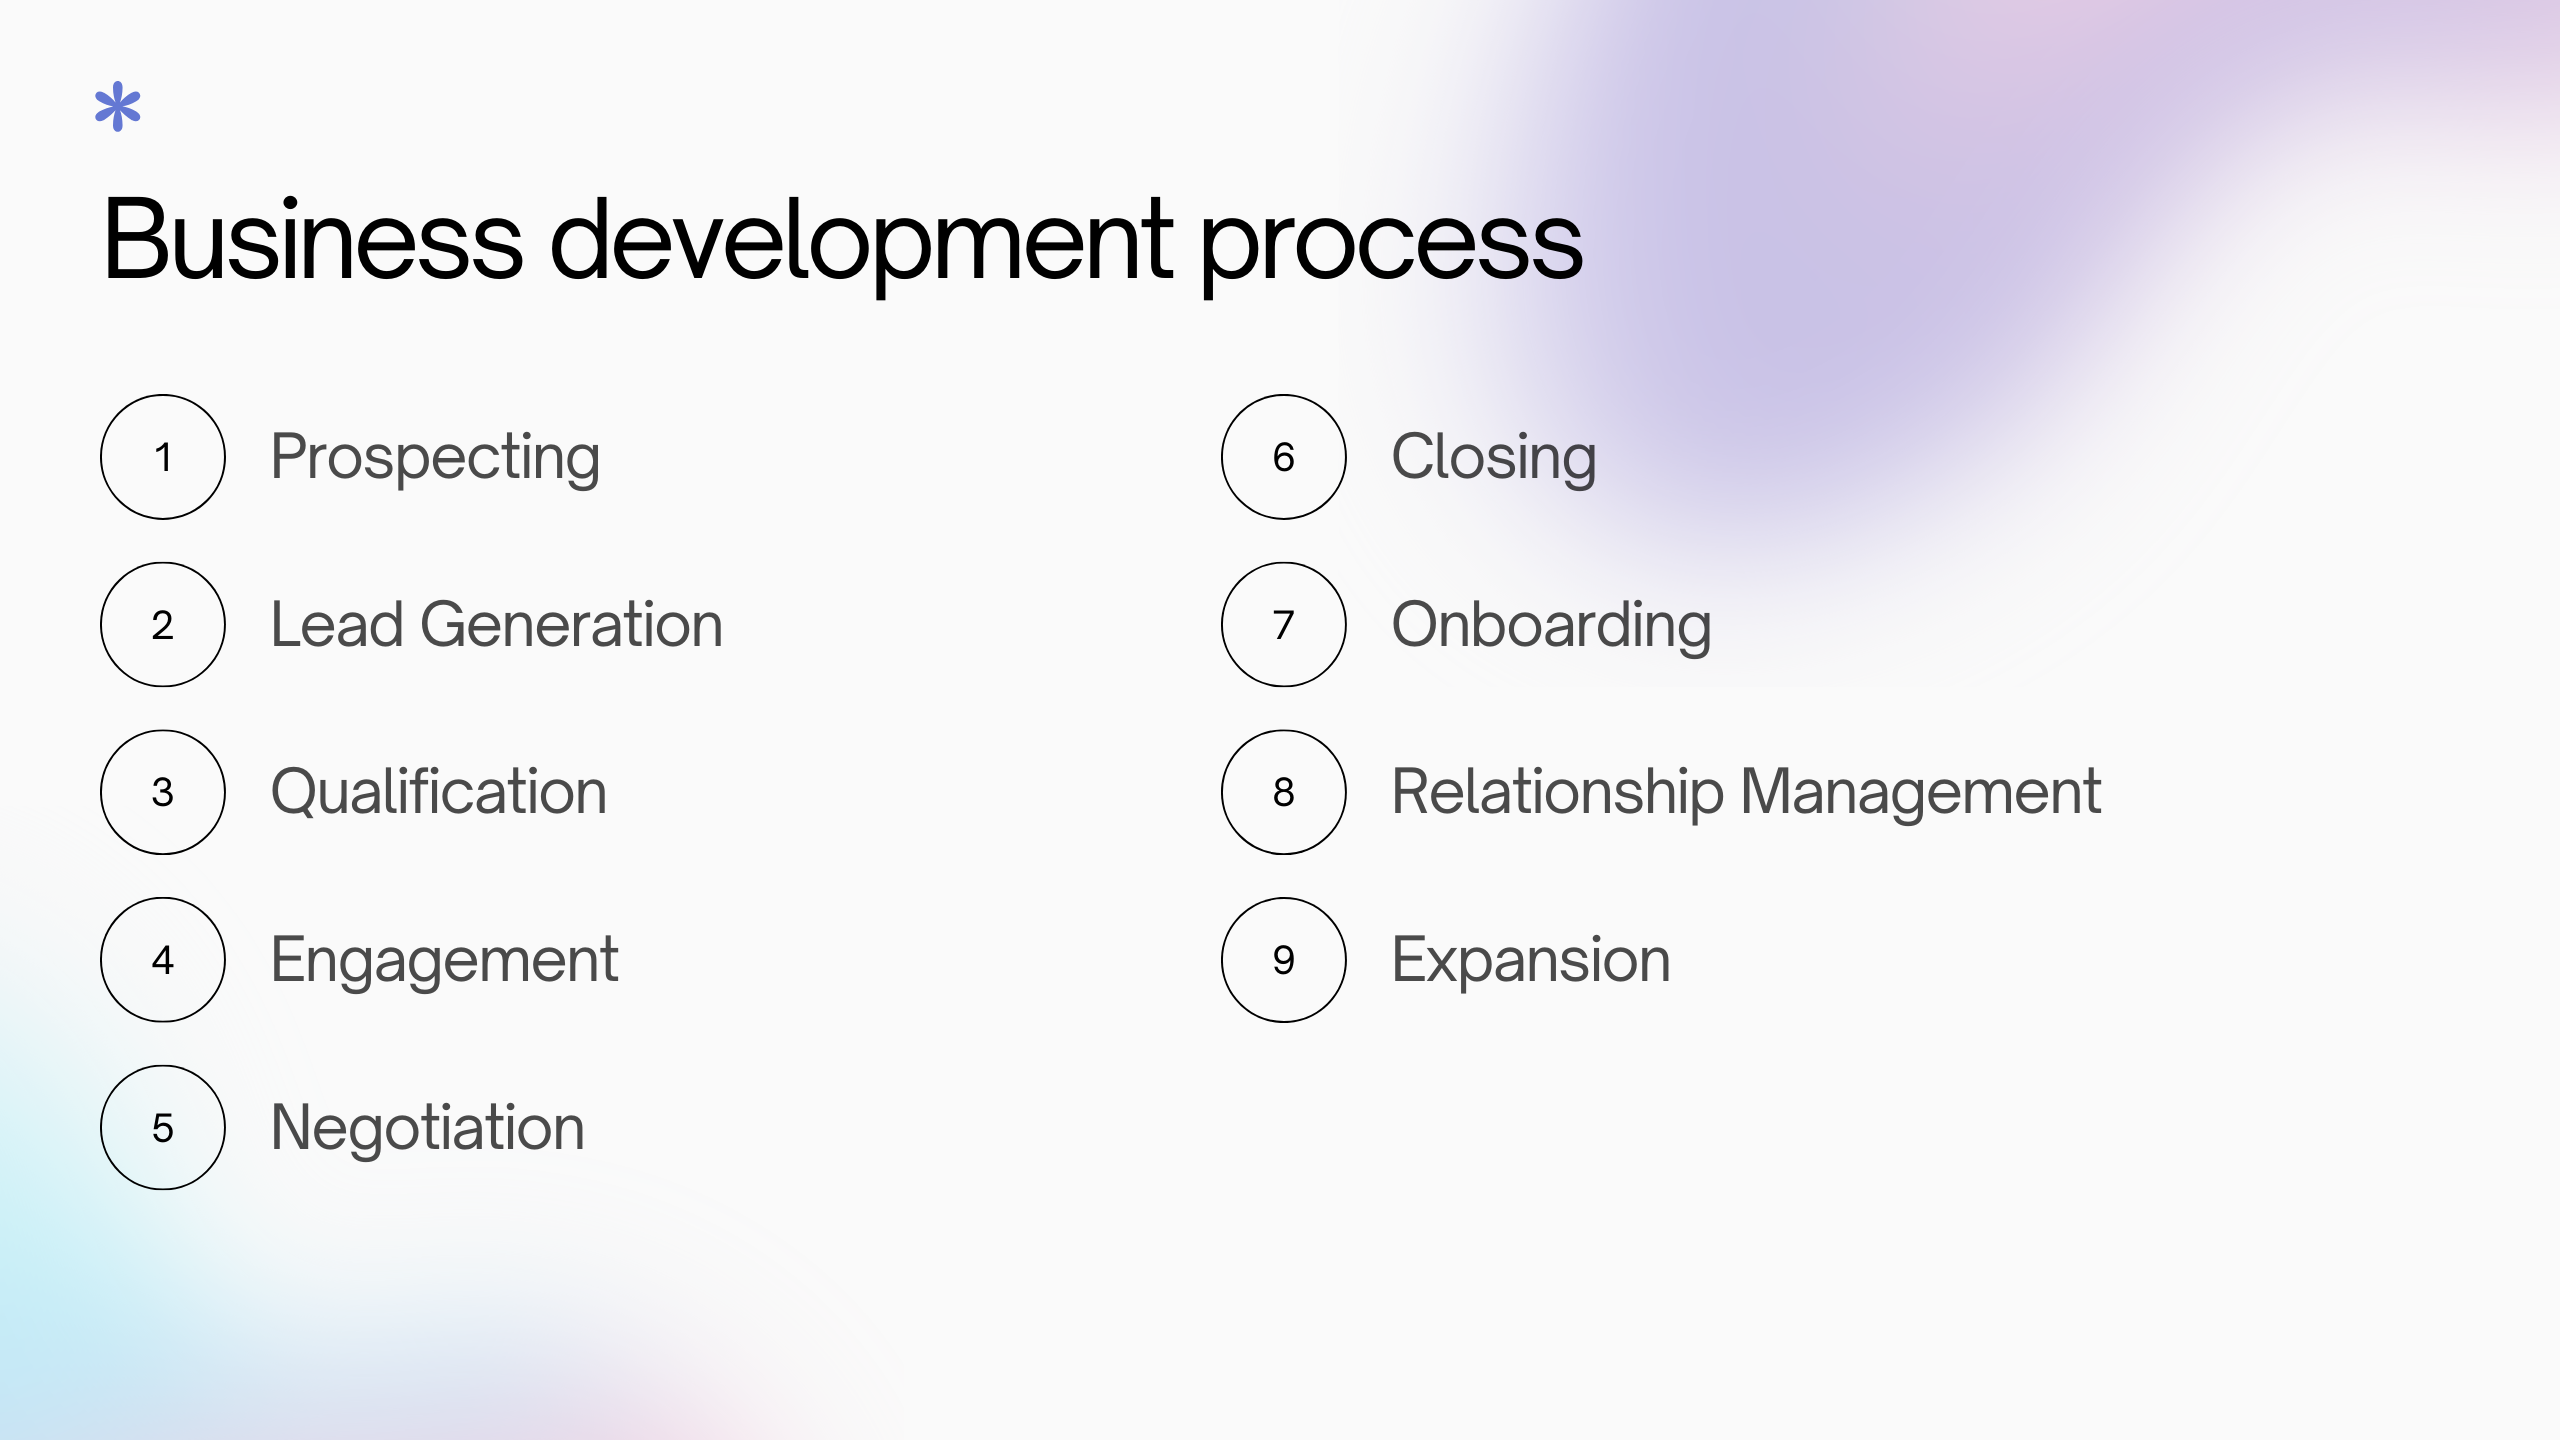 Business development step-by-step